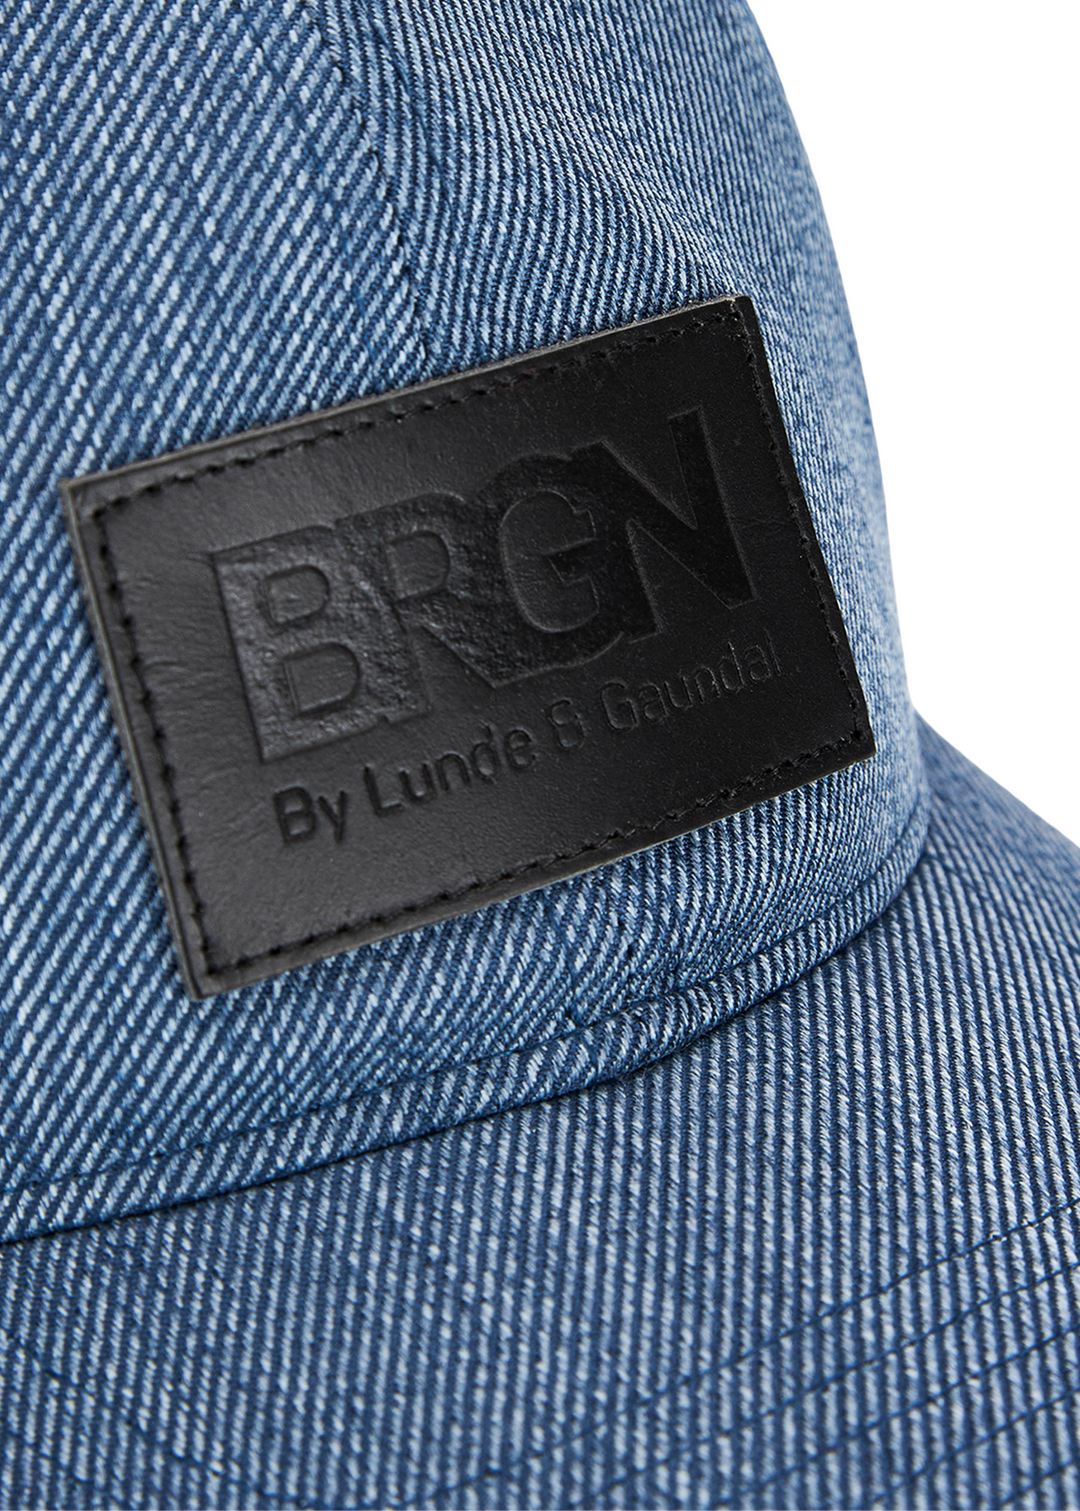 BRGN by Lunde & Gaundal Solregn caps Accessories 735 Denim Blue